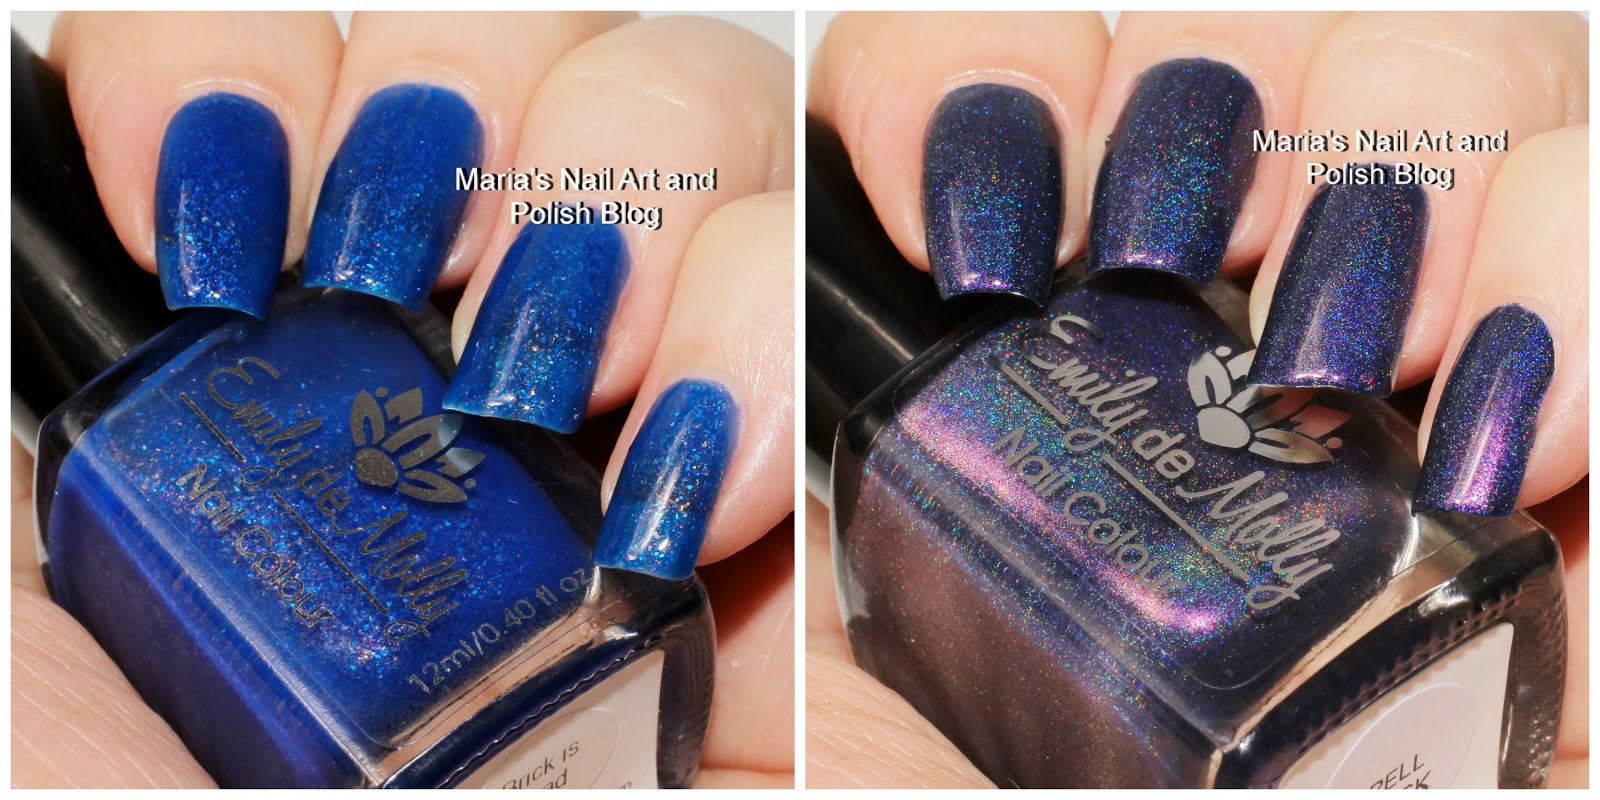 6. Emily de Molly Multichrome Nail Polish - Color Shifting Finishes - wide 2